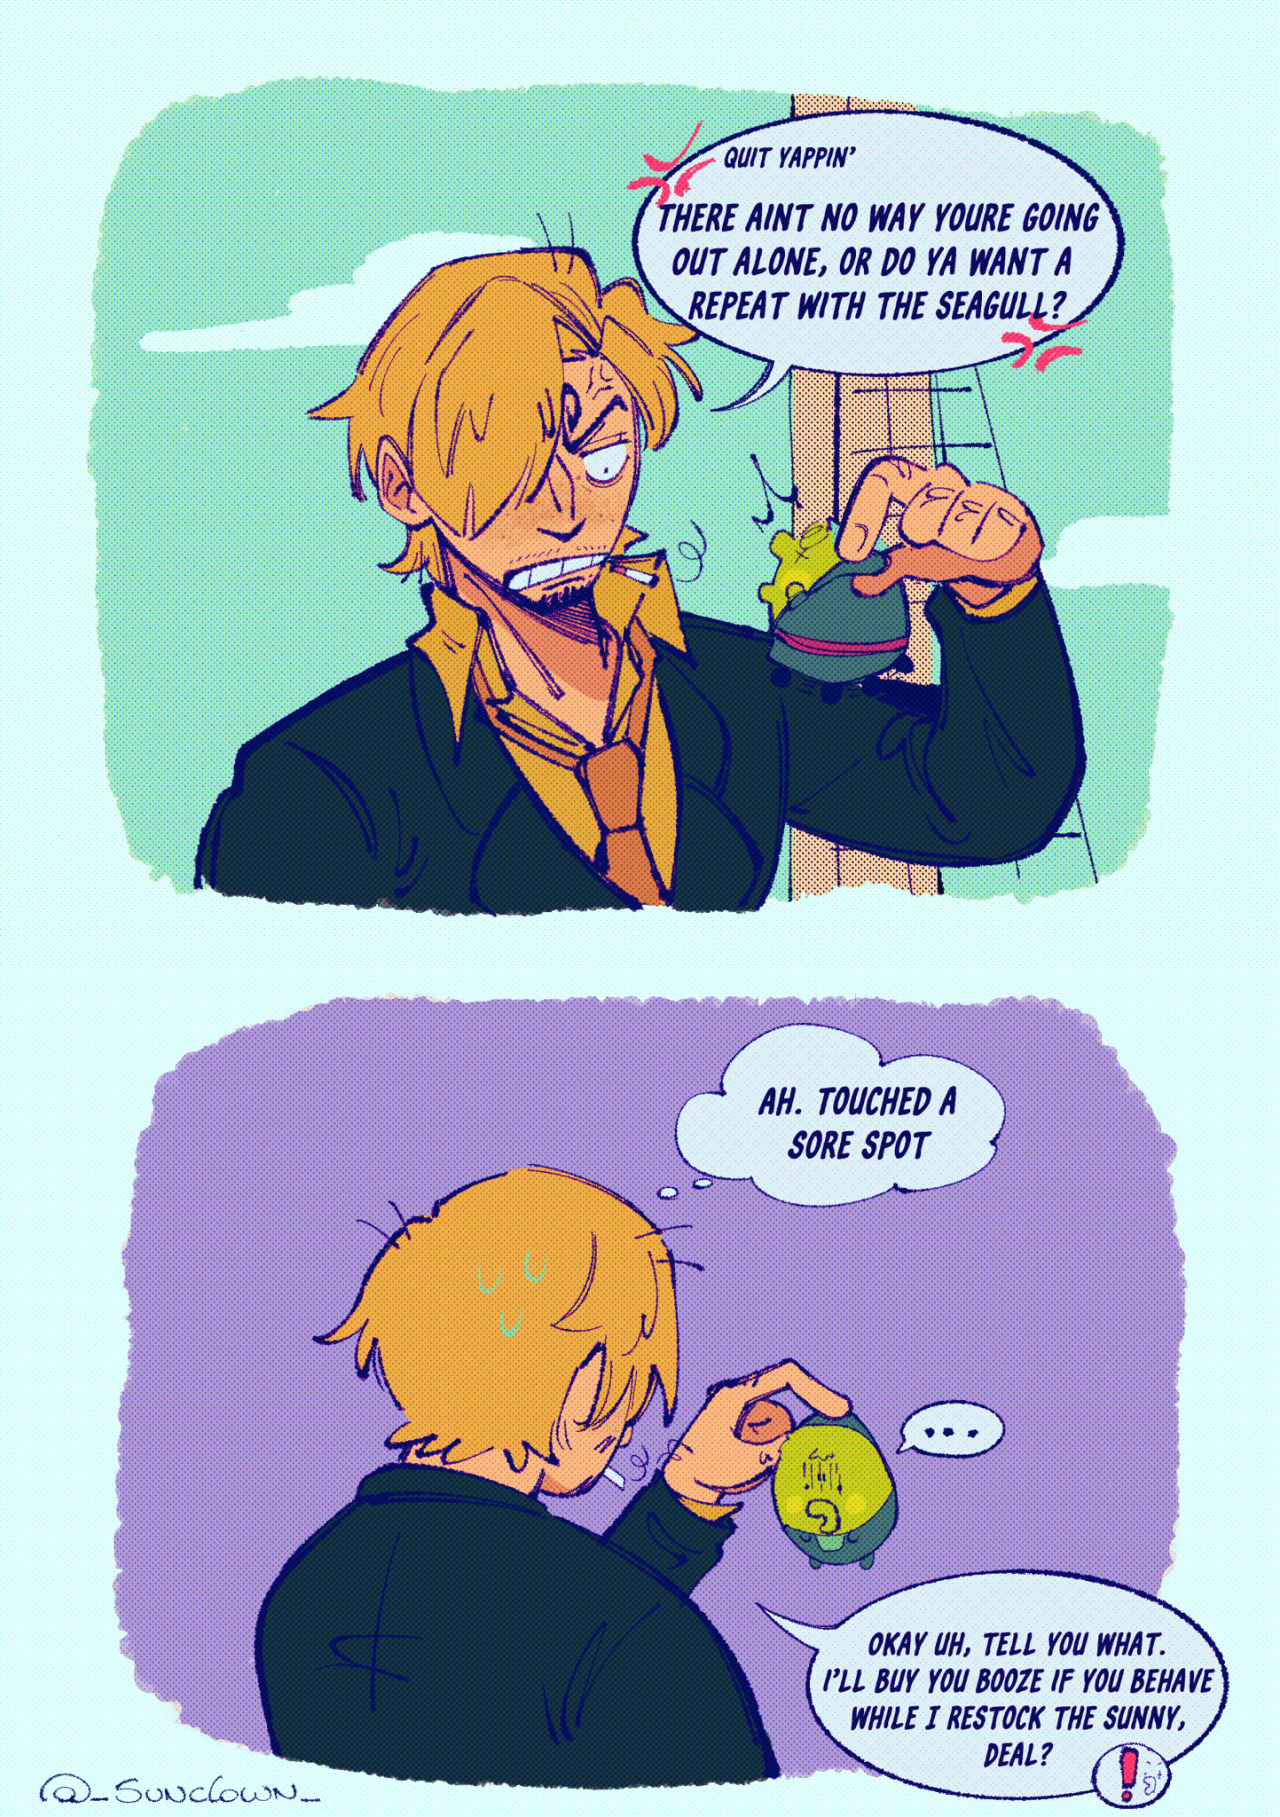 On the second page, 1st panel shows a very angry sanji whos looking at the tiny zoro hes holding with only two fingers while the latter one is squeaking angrily while kicking his feet in the air. “Quit yappin’” sanji says. “There aint no way youre going out alone, or do ya want a repeat with the seagull?” 2nd panel shows sanji from the back thinking “Ah. Touched a sore spot” still holding zoro who’s gone quiet. Zoro looks defeated, ashamed, pride stripped from him leaving him looking like a green grape dried on the sun. Sanji trying to lift his spirits says “Tell you what, ill buy you booze if you behave while I restock the sunny, deal?” Making zoro perk up at that.